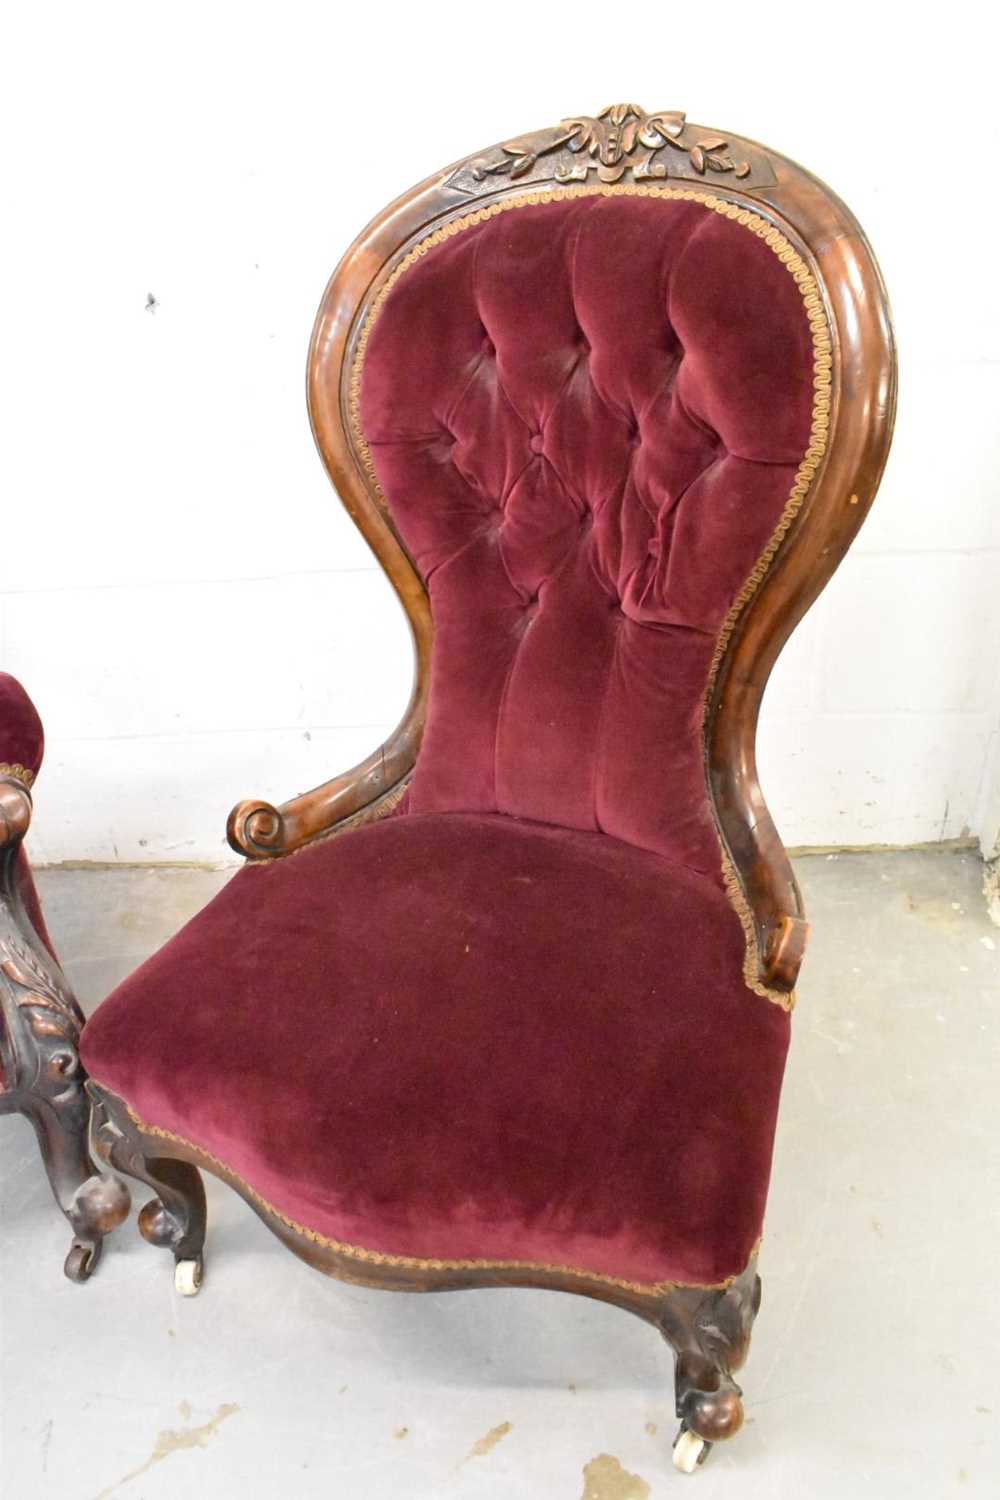 Pair of mid Victorian his and hers upholstered easy chairs - Image 4 of 5